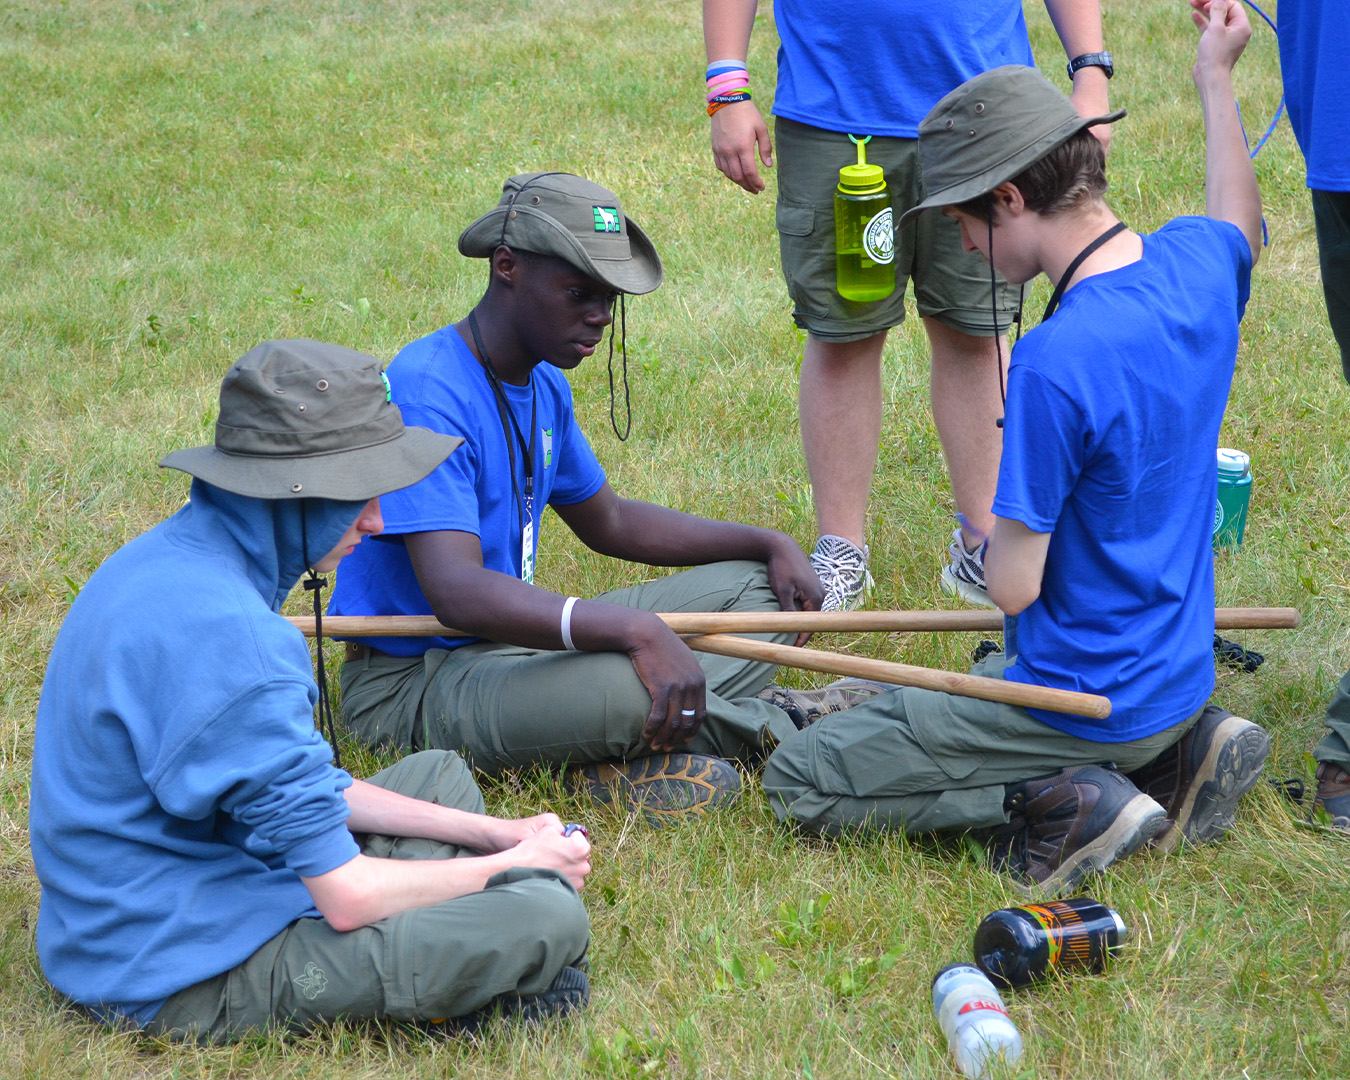 A group of Scouts sitting in the grass work on lashings while wearing the grey wolf shirt (a blue t-shirt with the grey wolf logo on the chest)